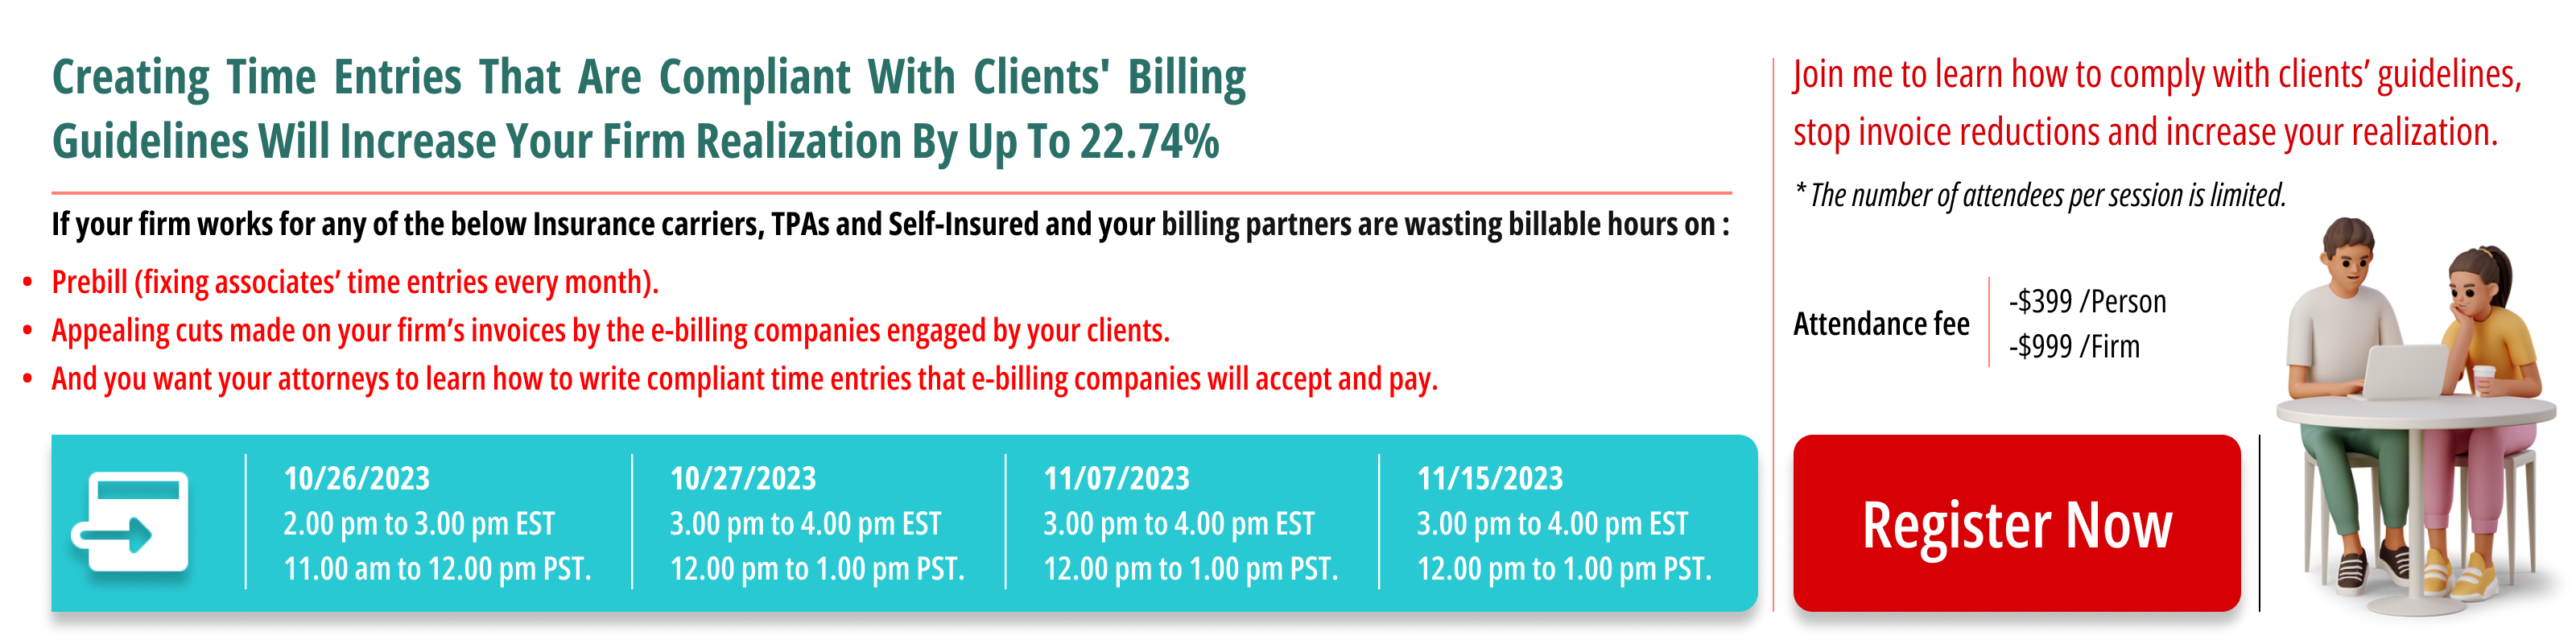 Clients' Billing Guidelines Compliance Training